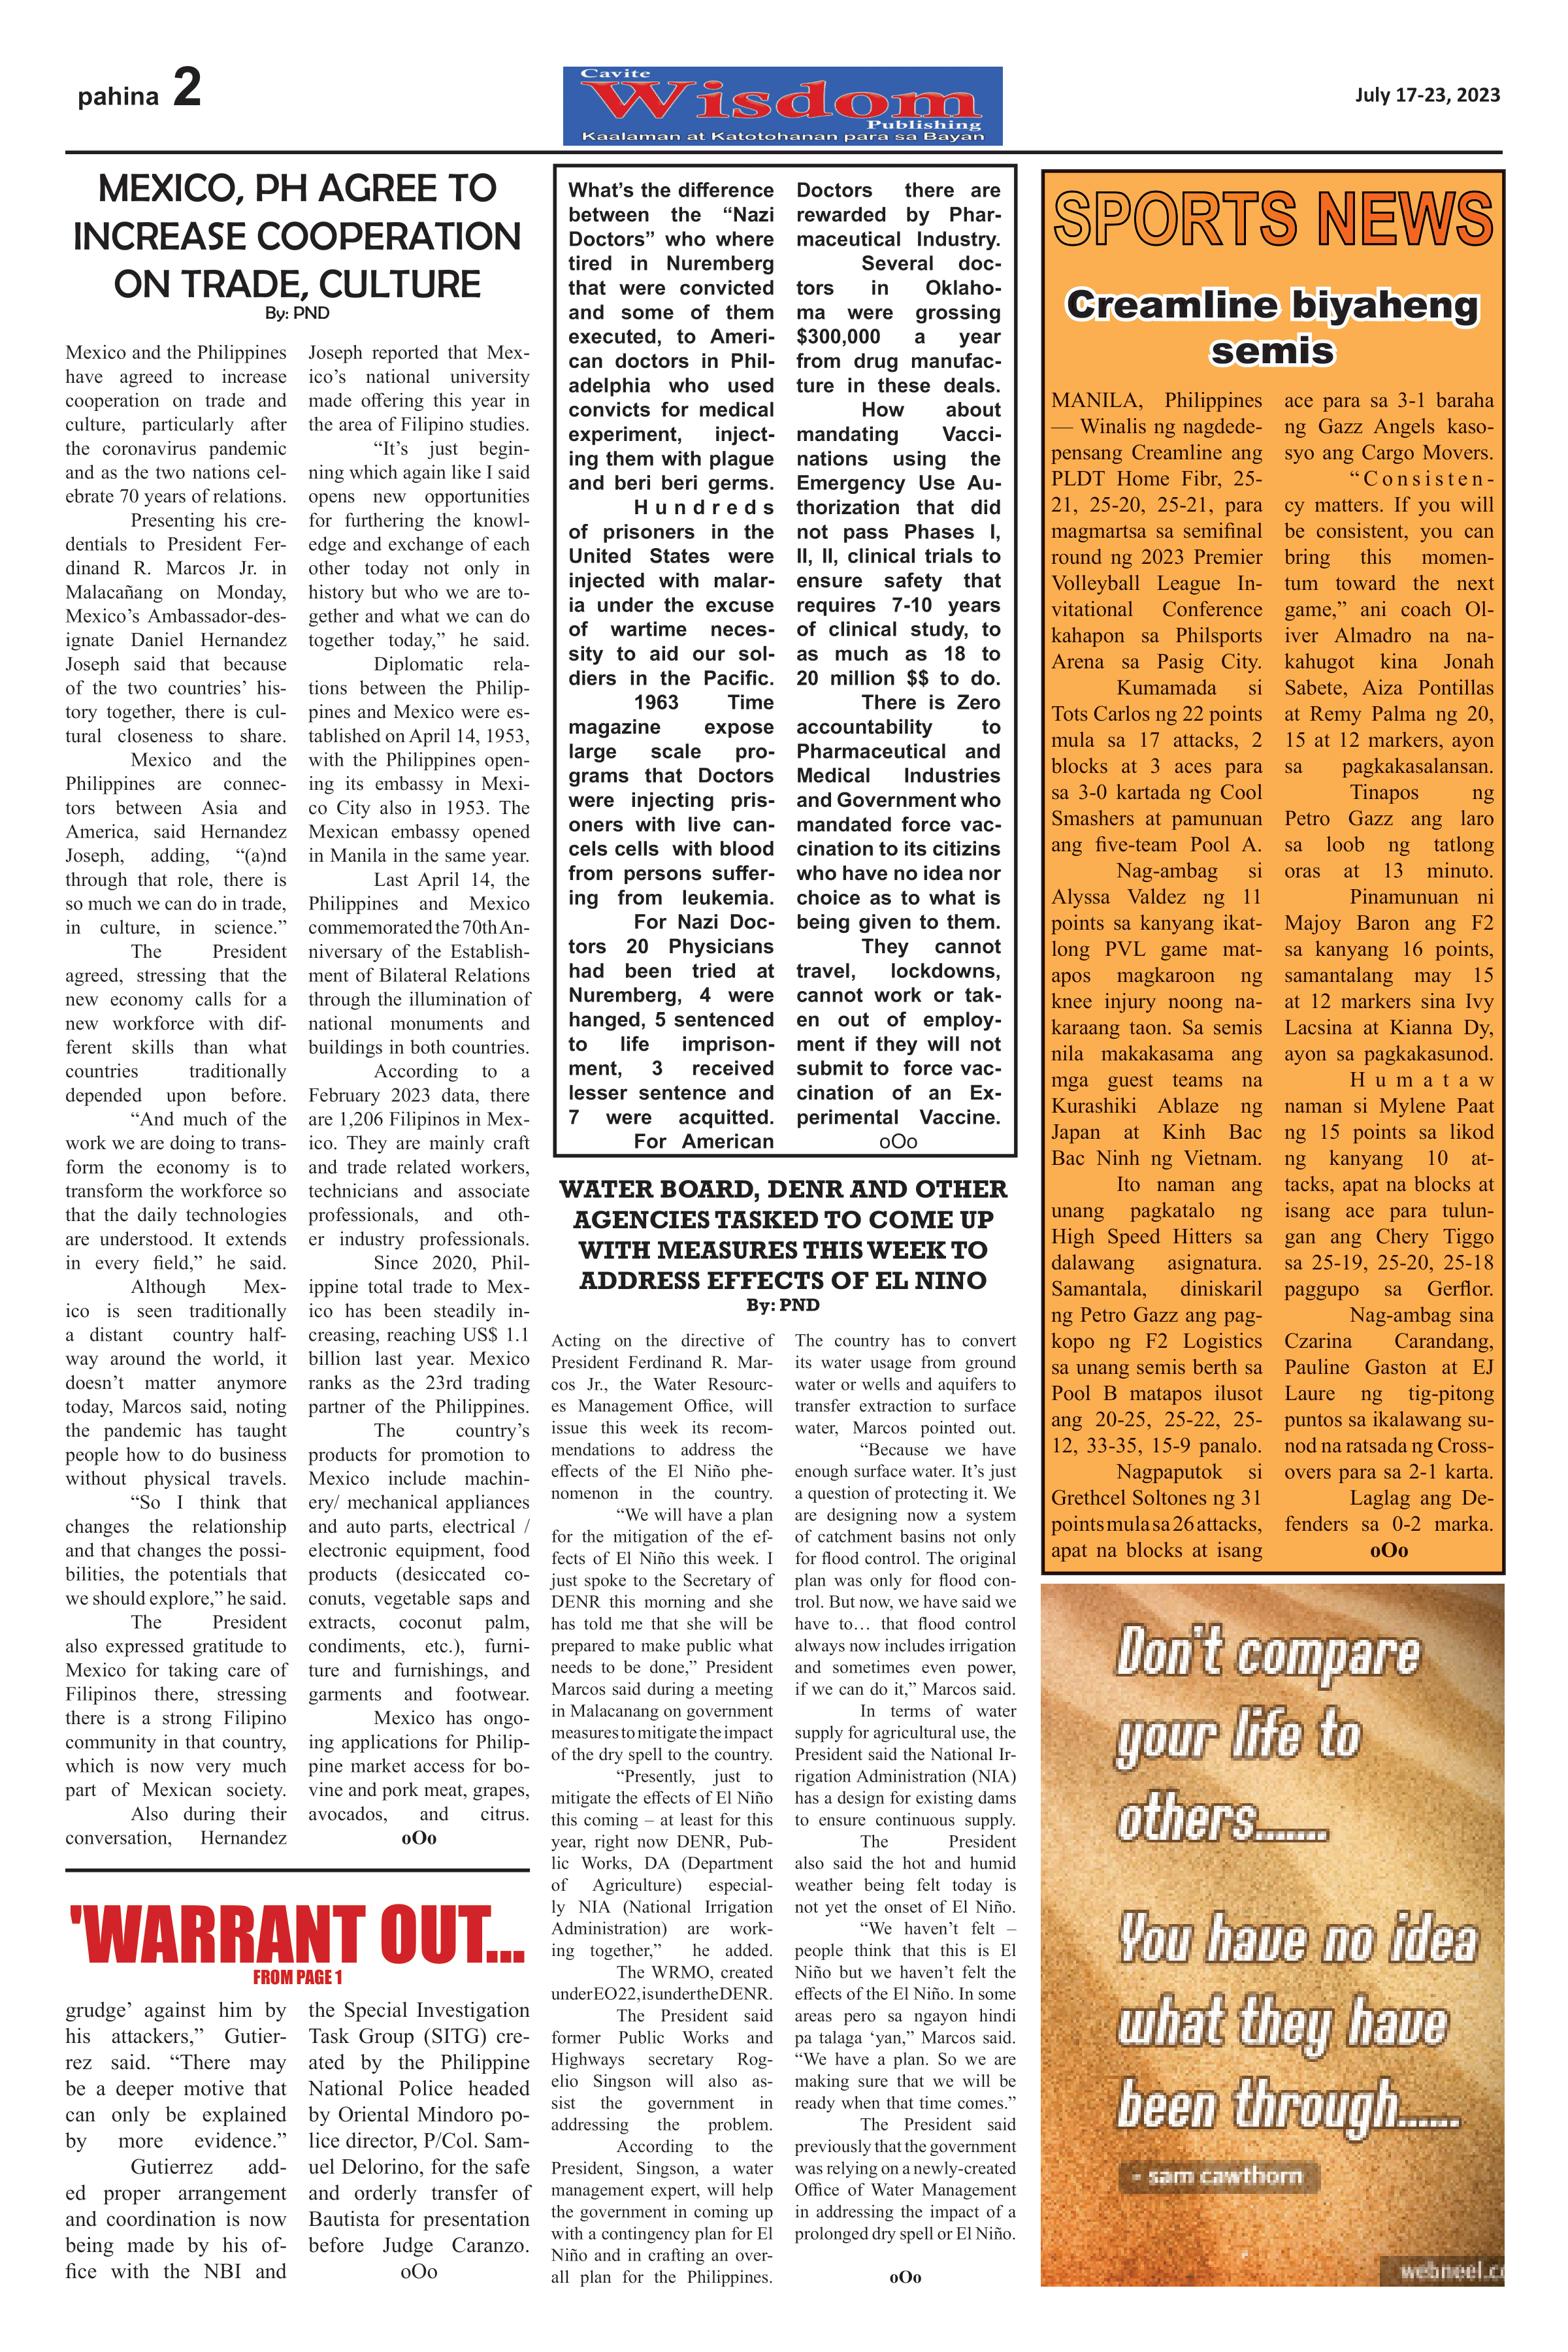 news page volume5/no22/2.png